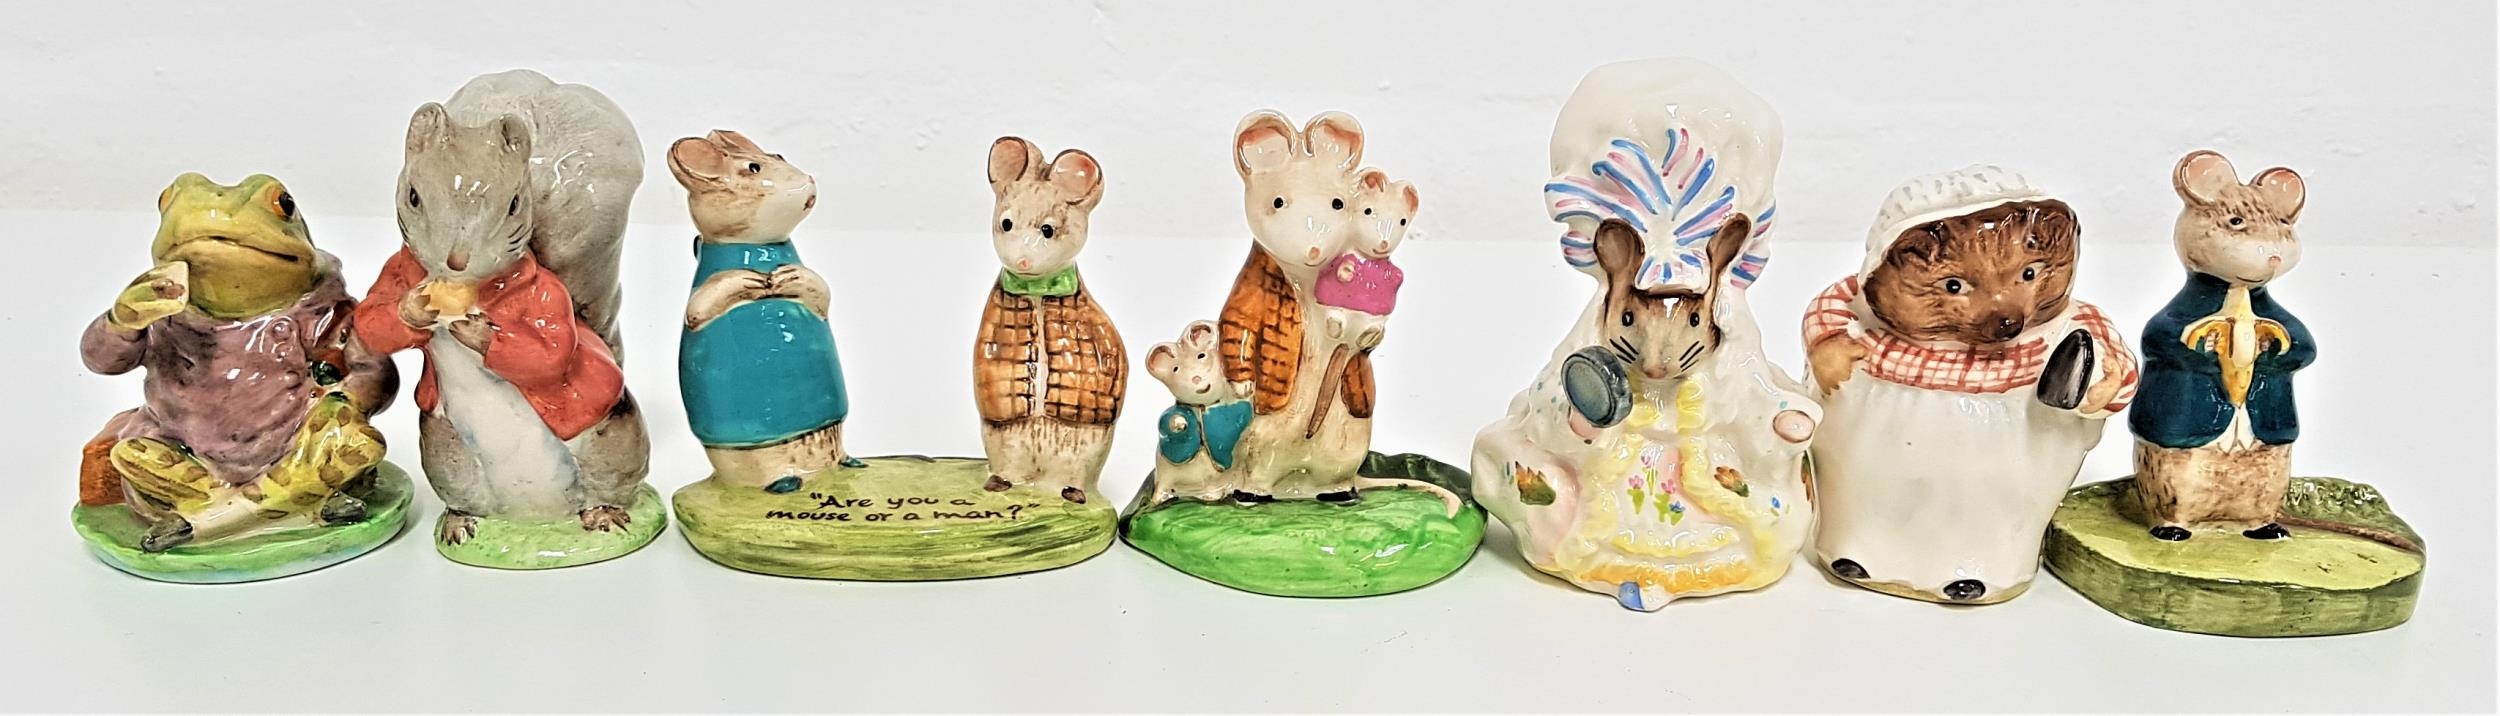 FOUR BESWICK BEATRIX POTTER FIGURINES comprising Mrs. Tiggy Winkle, 8cm high, Lady Mouse, 9.8cm